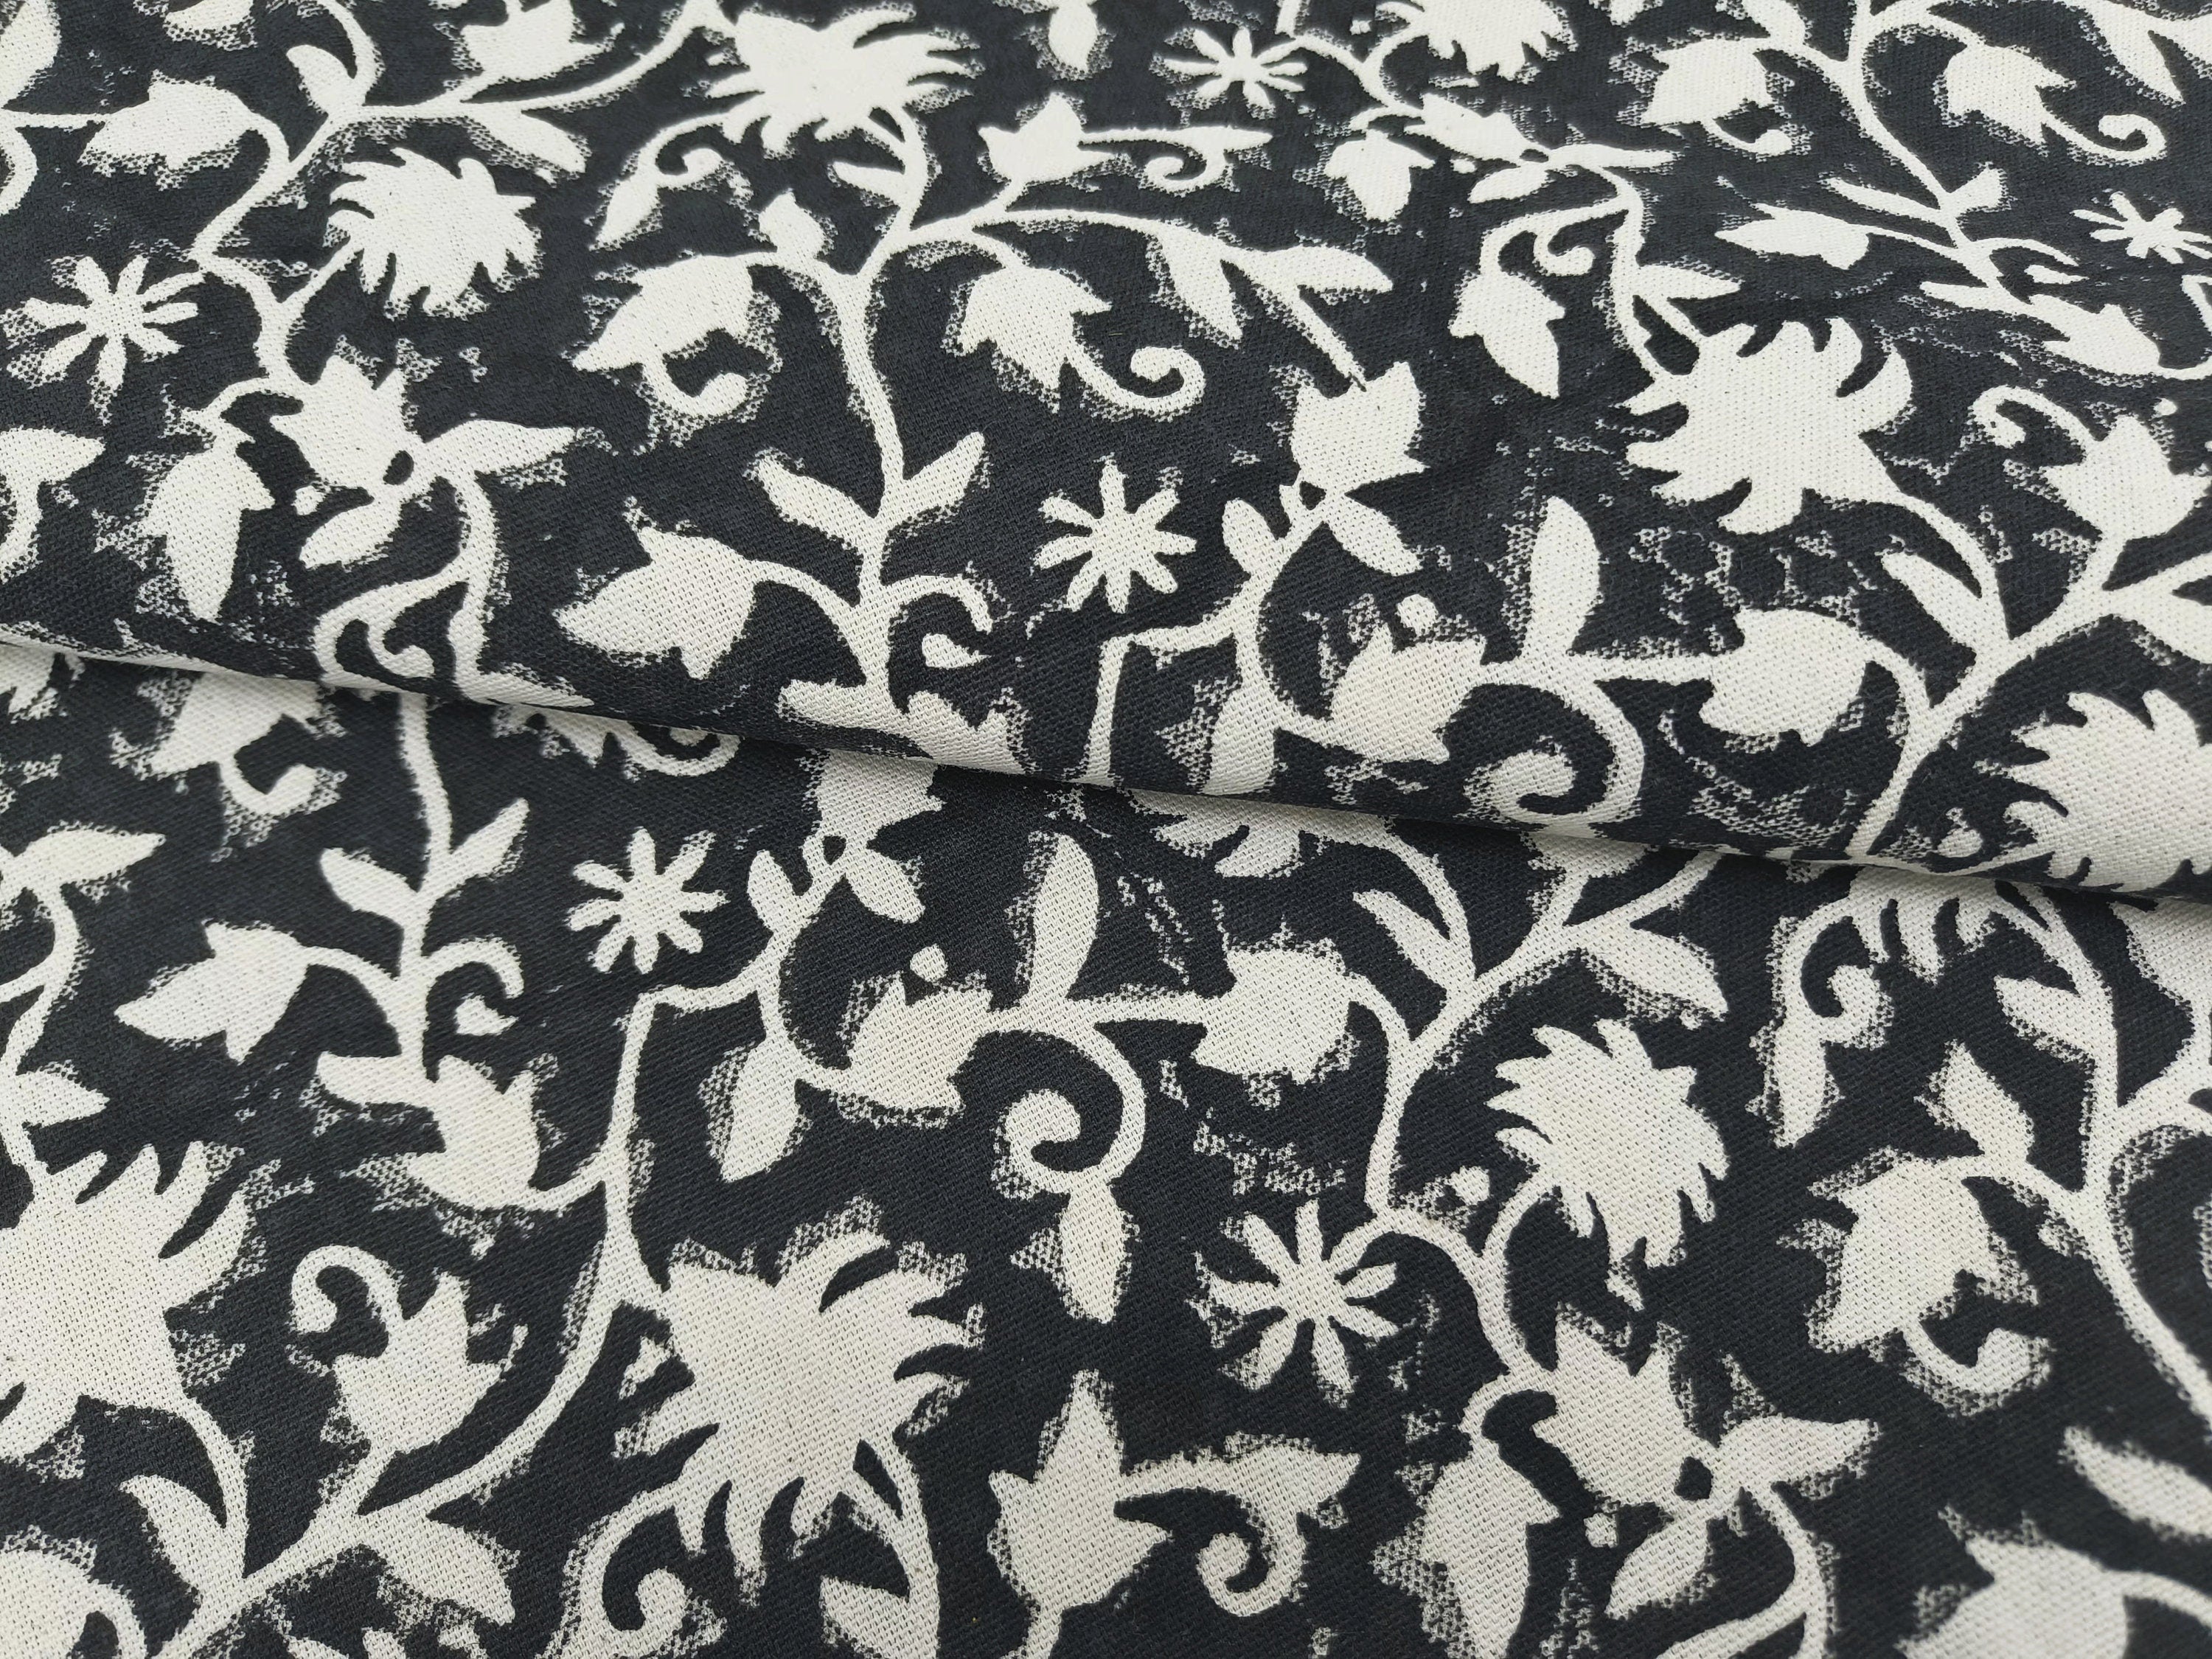 Block Print Linen Fabric, Zelly Fish Black  Hand Block Print Duck Canvas Linen  Heavy Weight Linen Fabric  Upholstery Fabric  Fabric By The Yard